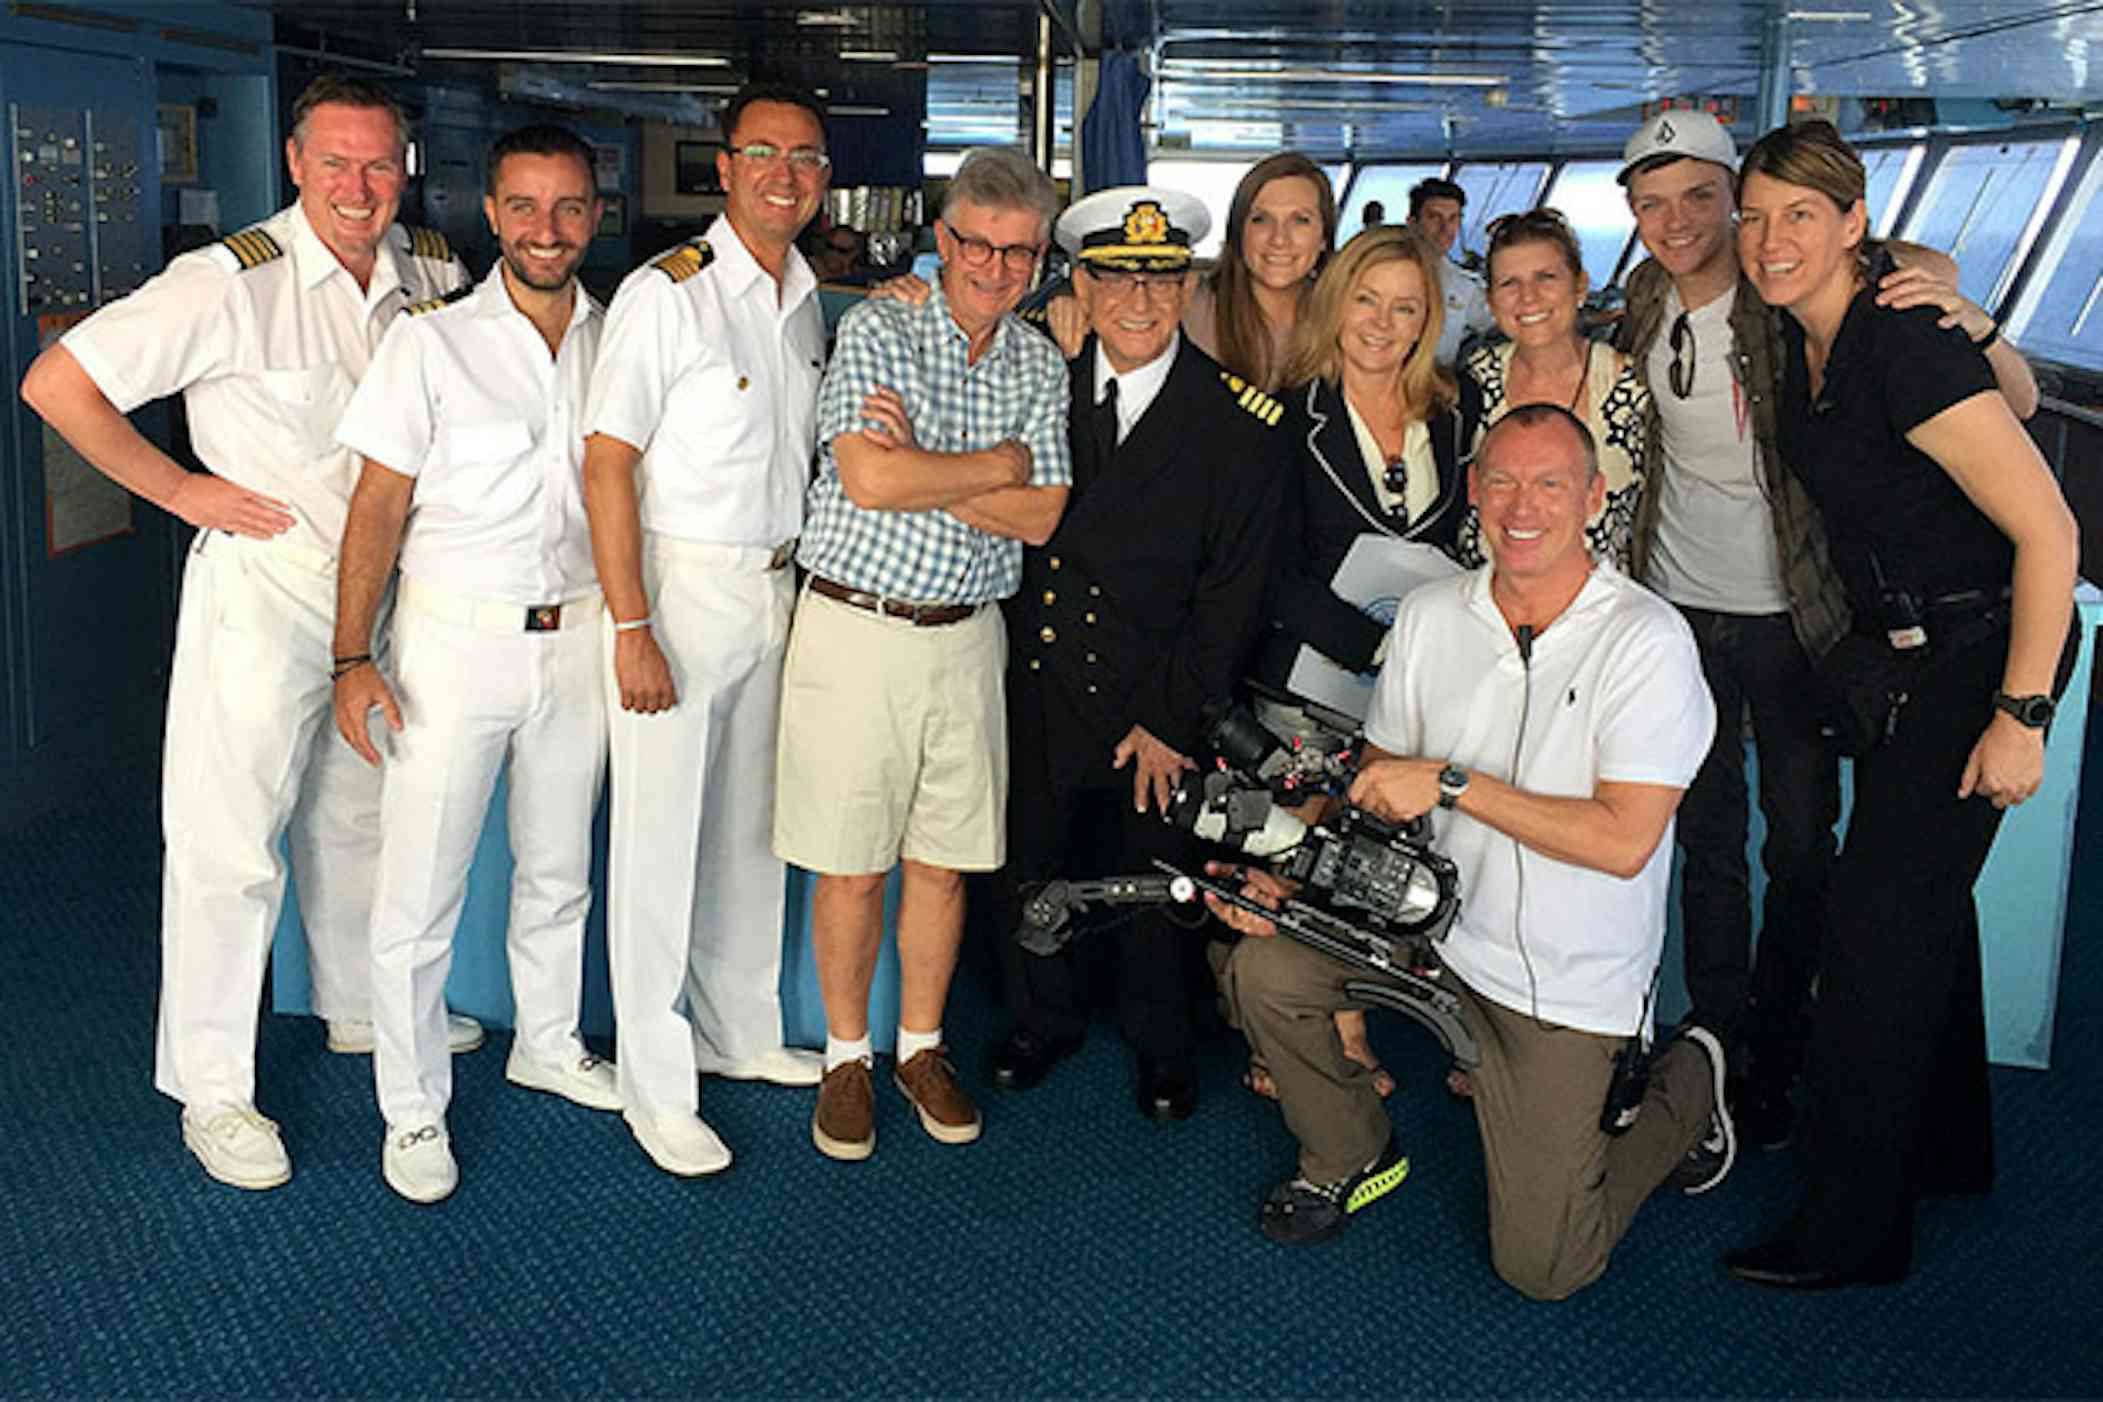 Exciting and new introductions between the original cast of The Love Boat  and The Real Love Boat hosts and crew - Princess Cruises